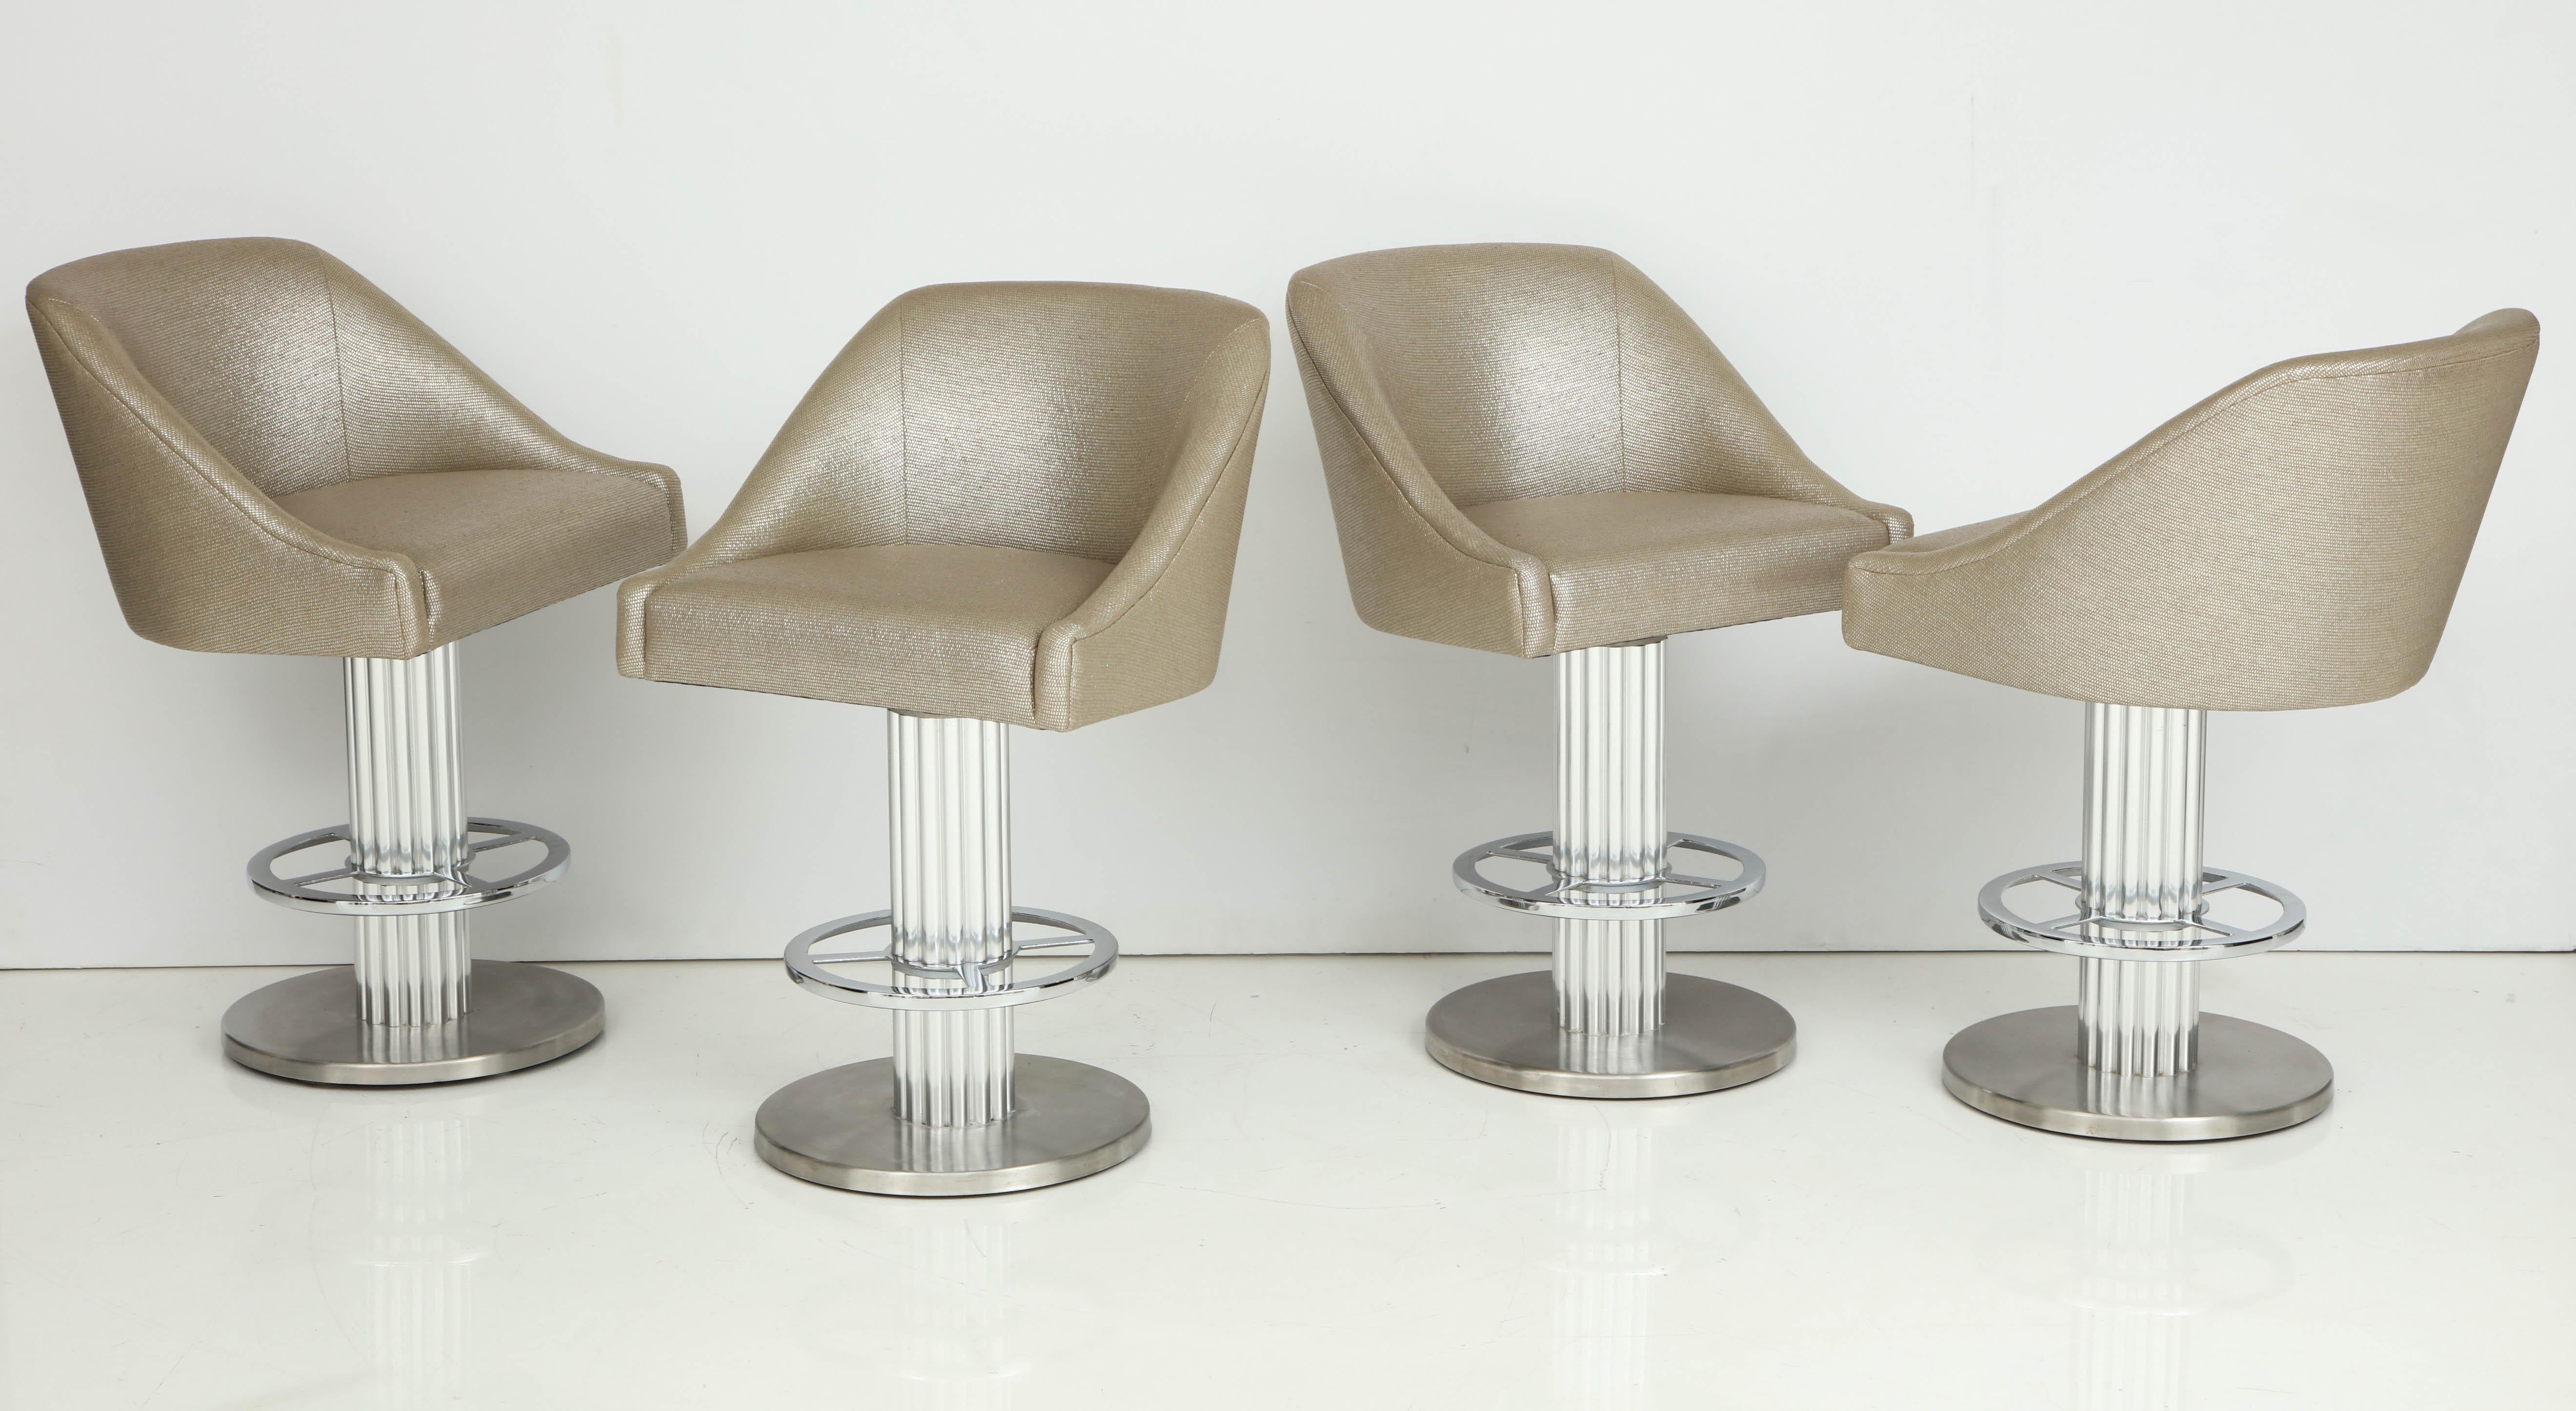 Wonderful set of four 1980's designs for Leisure bar stools.
The bar stools are polished and brushed nickel over heavy steel frames.
They have been newly reupholstered in a luxurious metallic zinc textiles fabric by Romo.